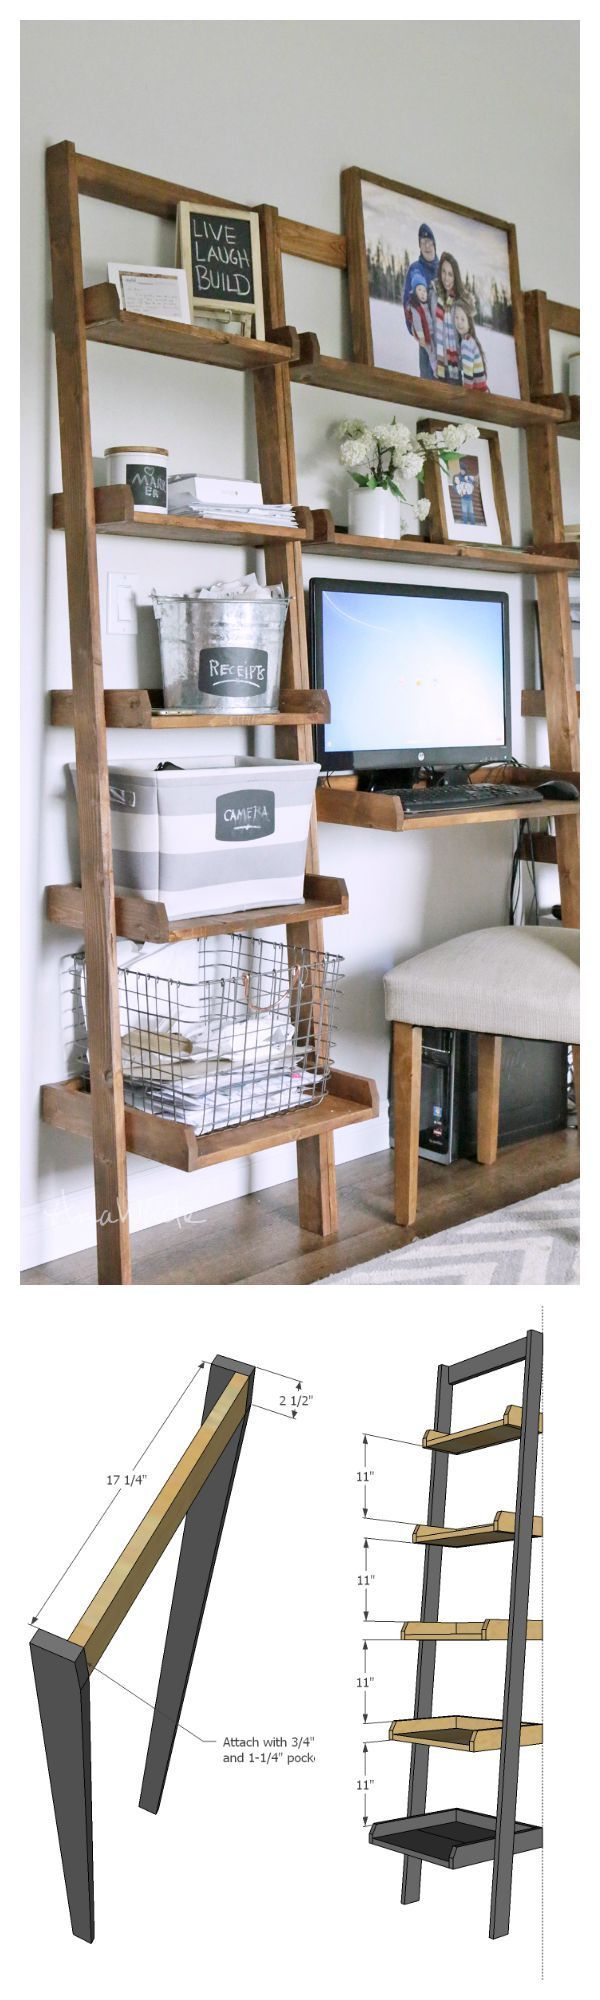 diy shelf- leaning ladder wall bookshelf made from 1x boards desk plans too